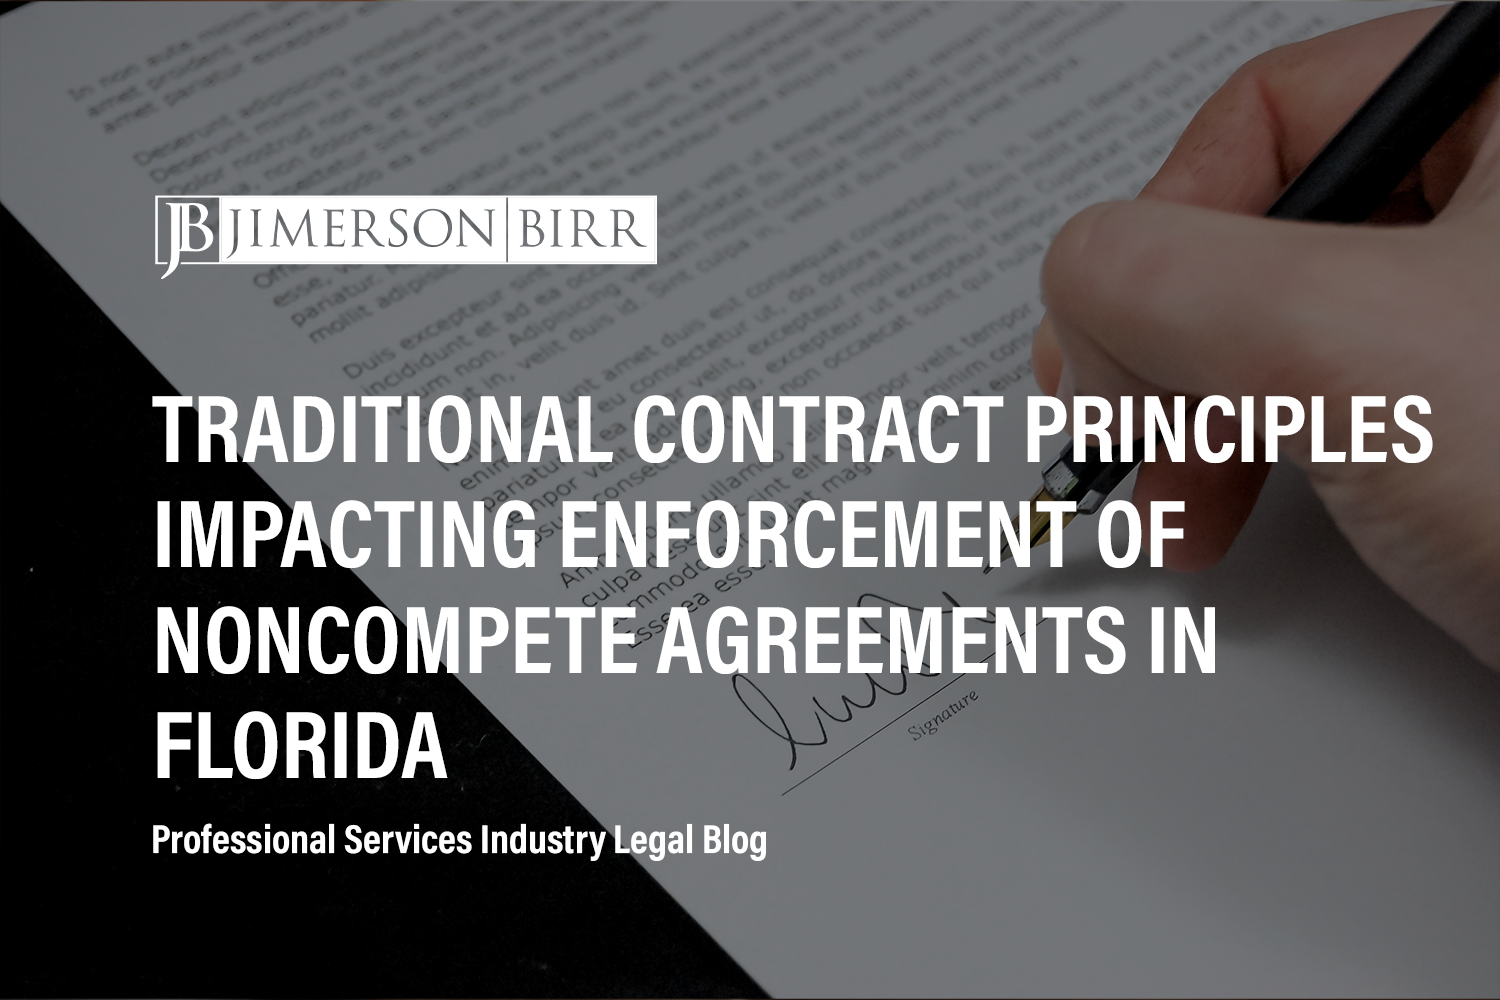 Traditional Contract Principles Impacting Enforcement of Noncompete Agreements in Florida